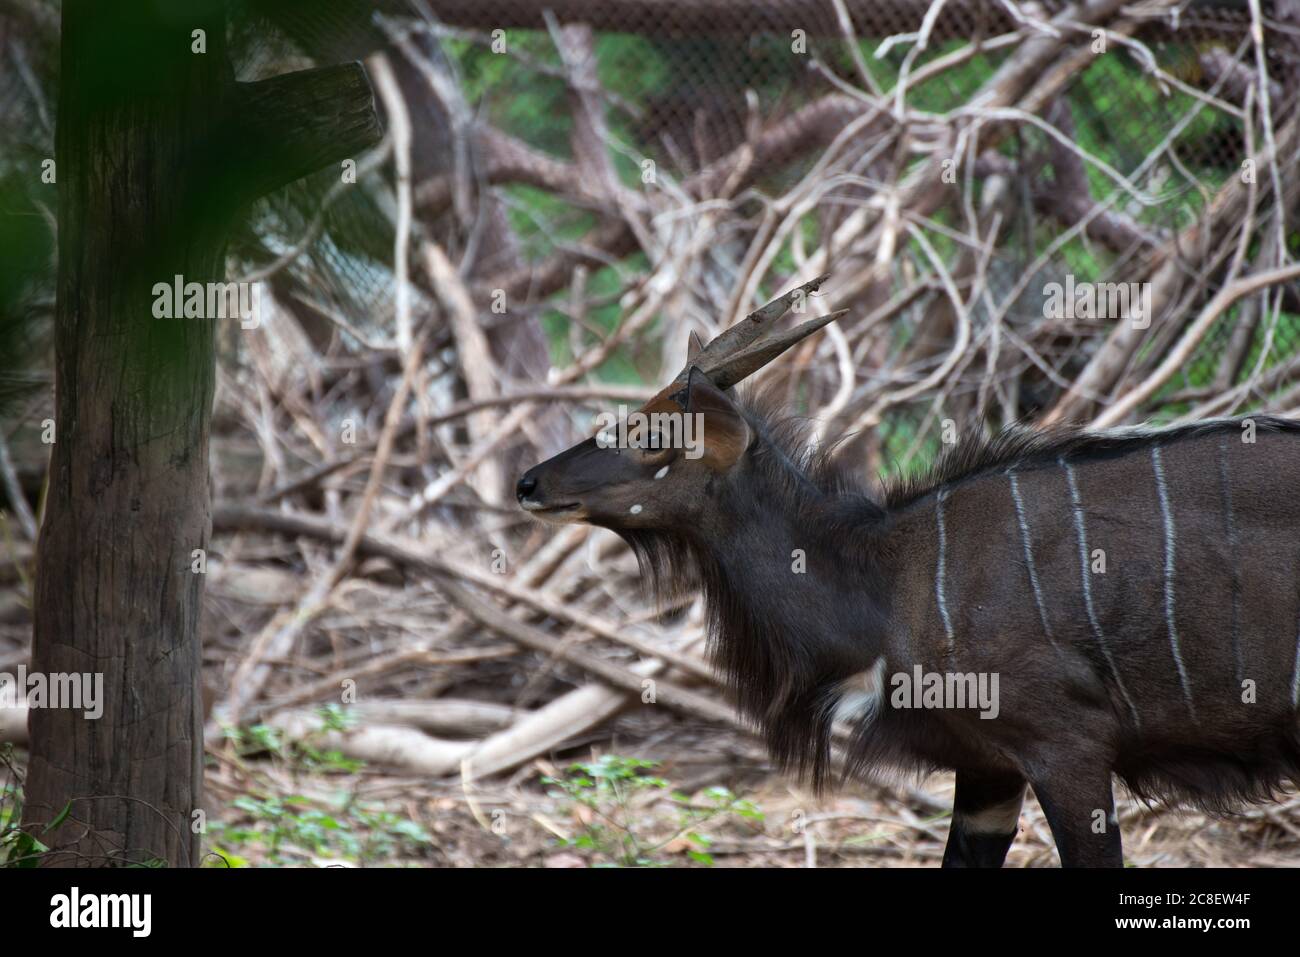 The scenery of the tragelaphus angasii or antelope walking in the zoo. Stock Photo